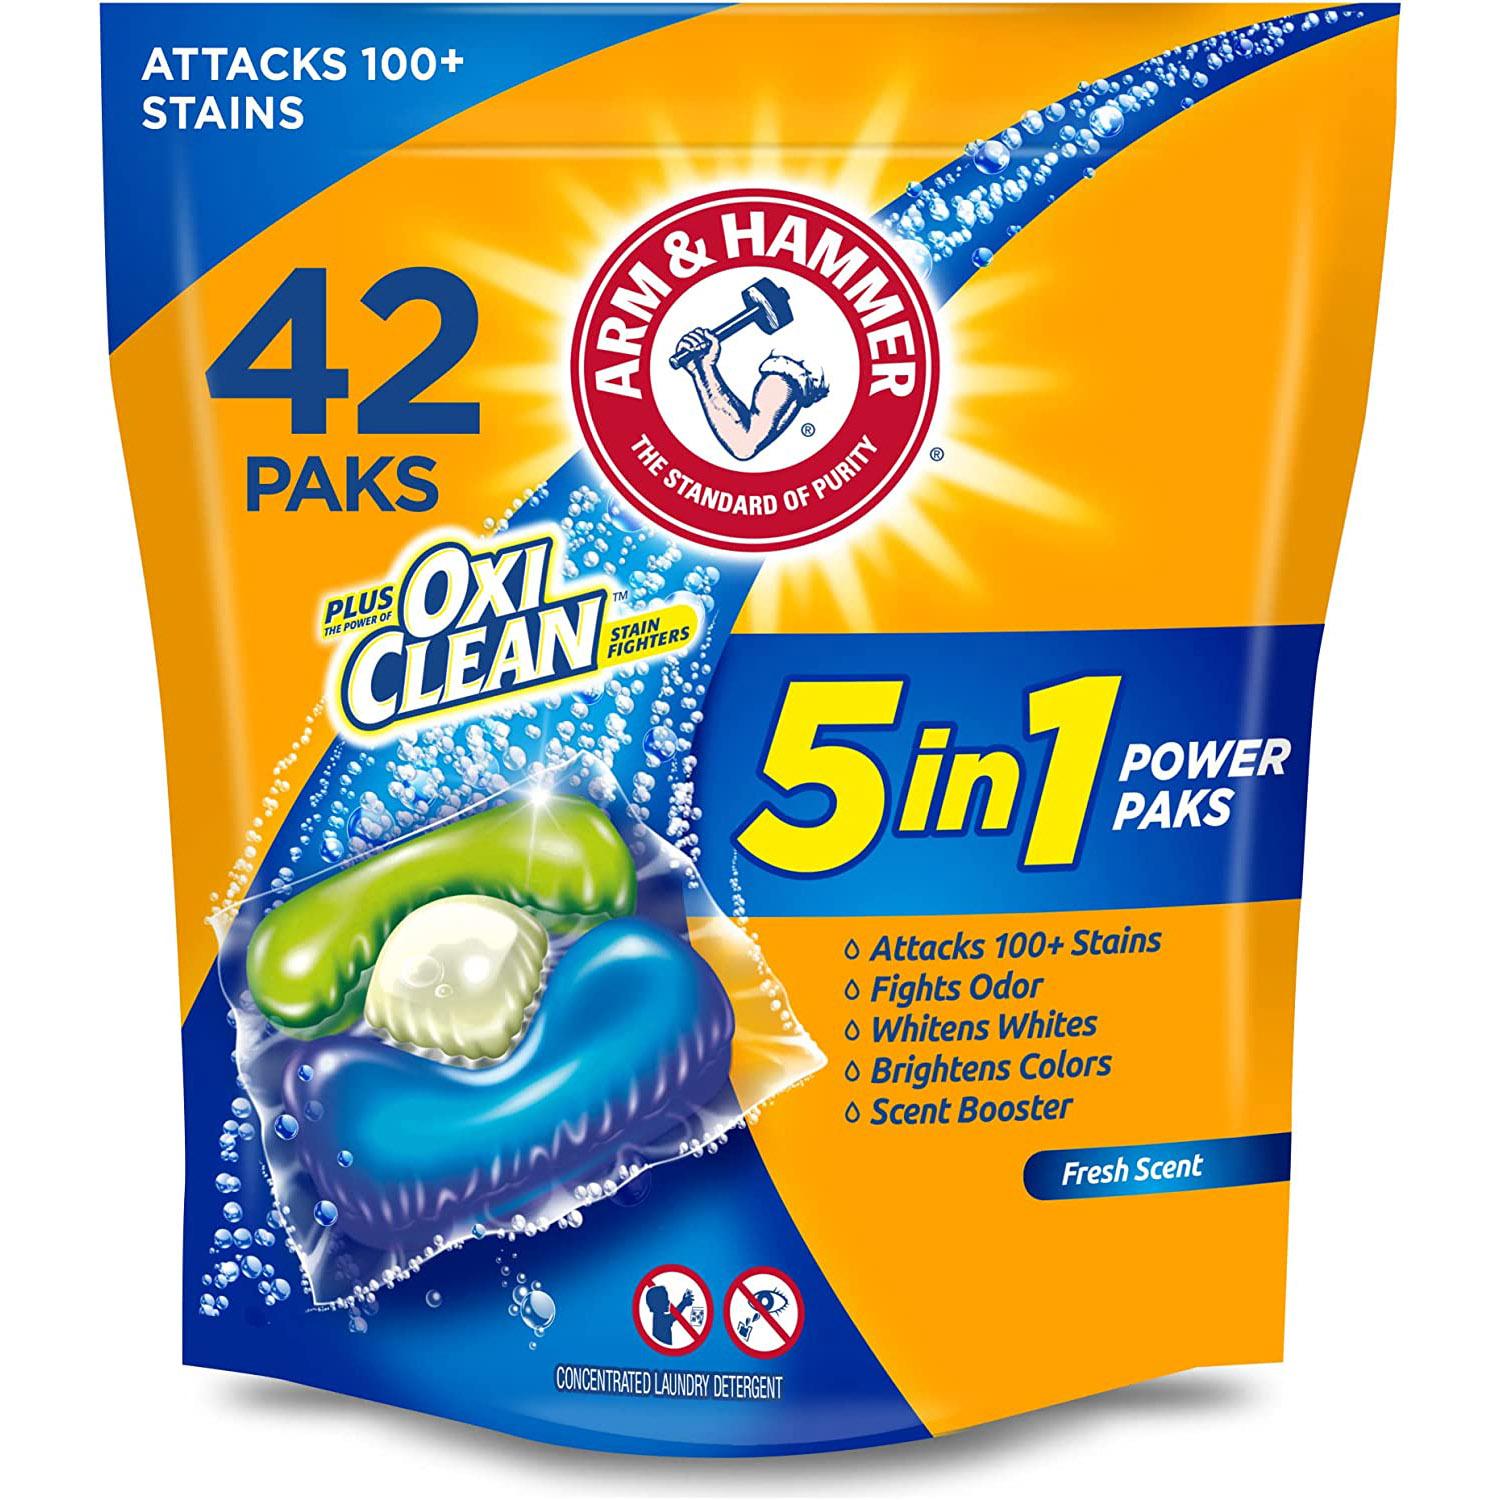 40 Arm & Hammer Plus OxiClean Laundry Detergent for $6.29 Shipped